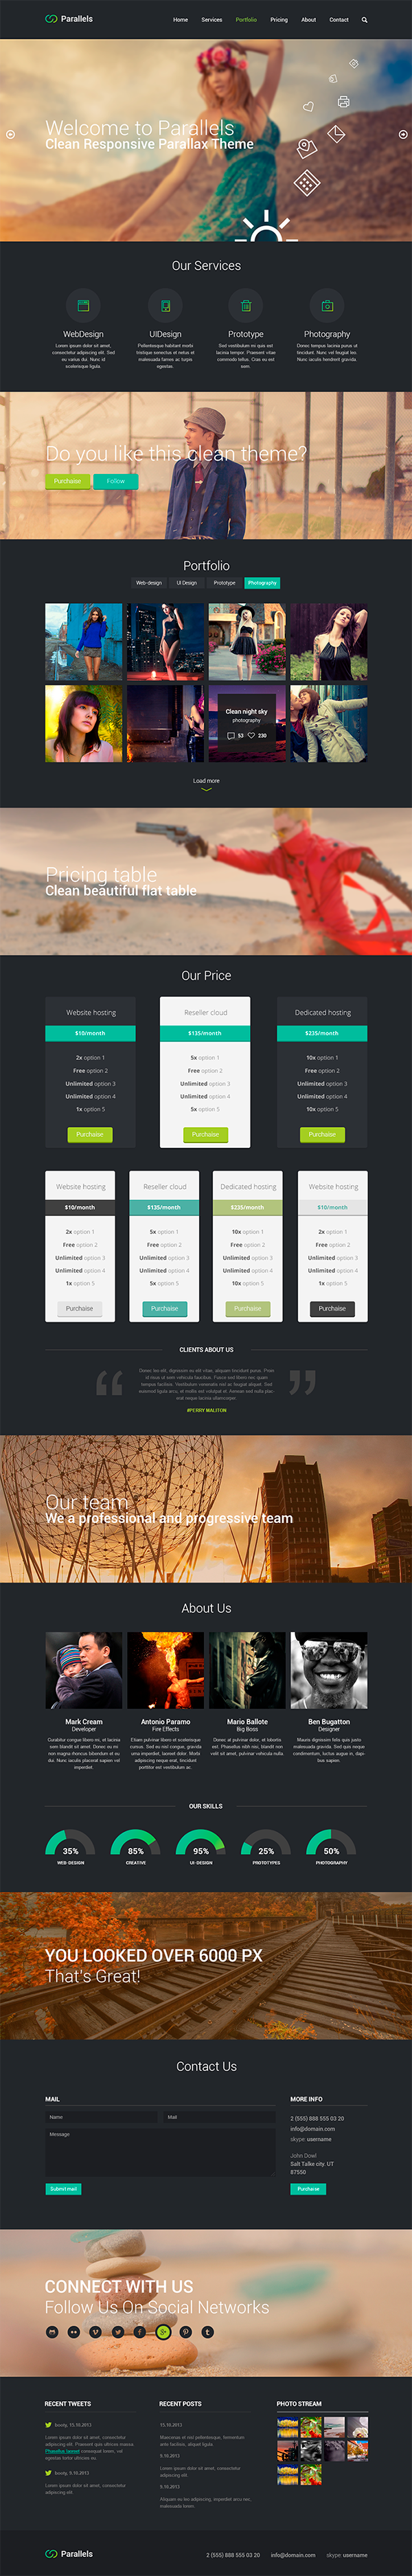 Free PSD Responsive Template